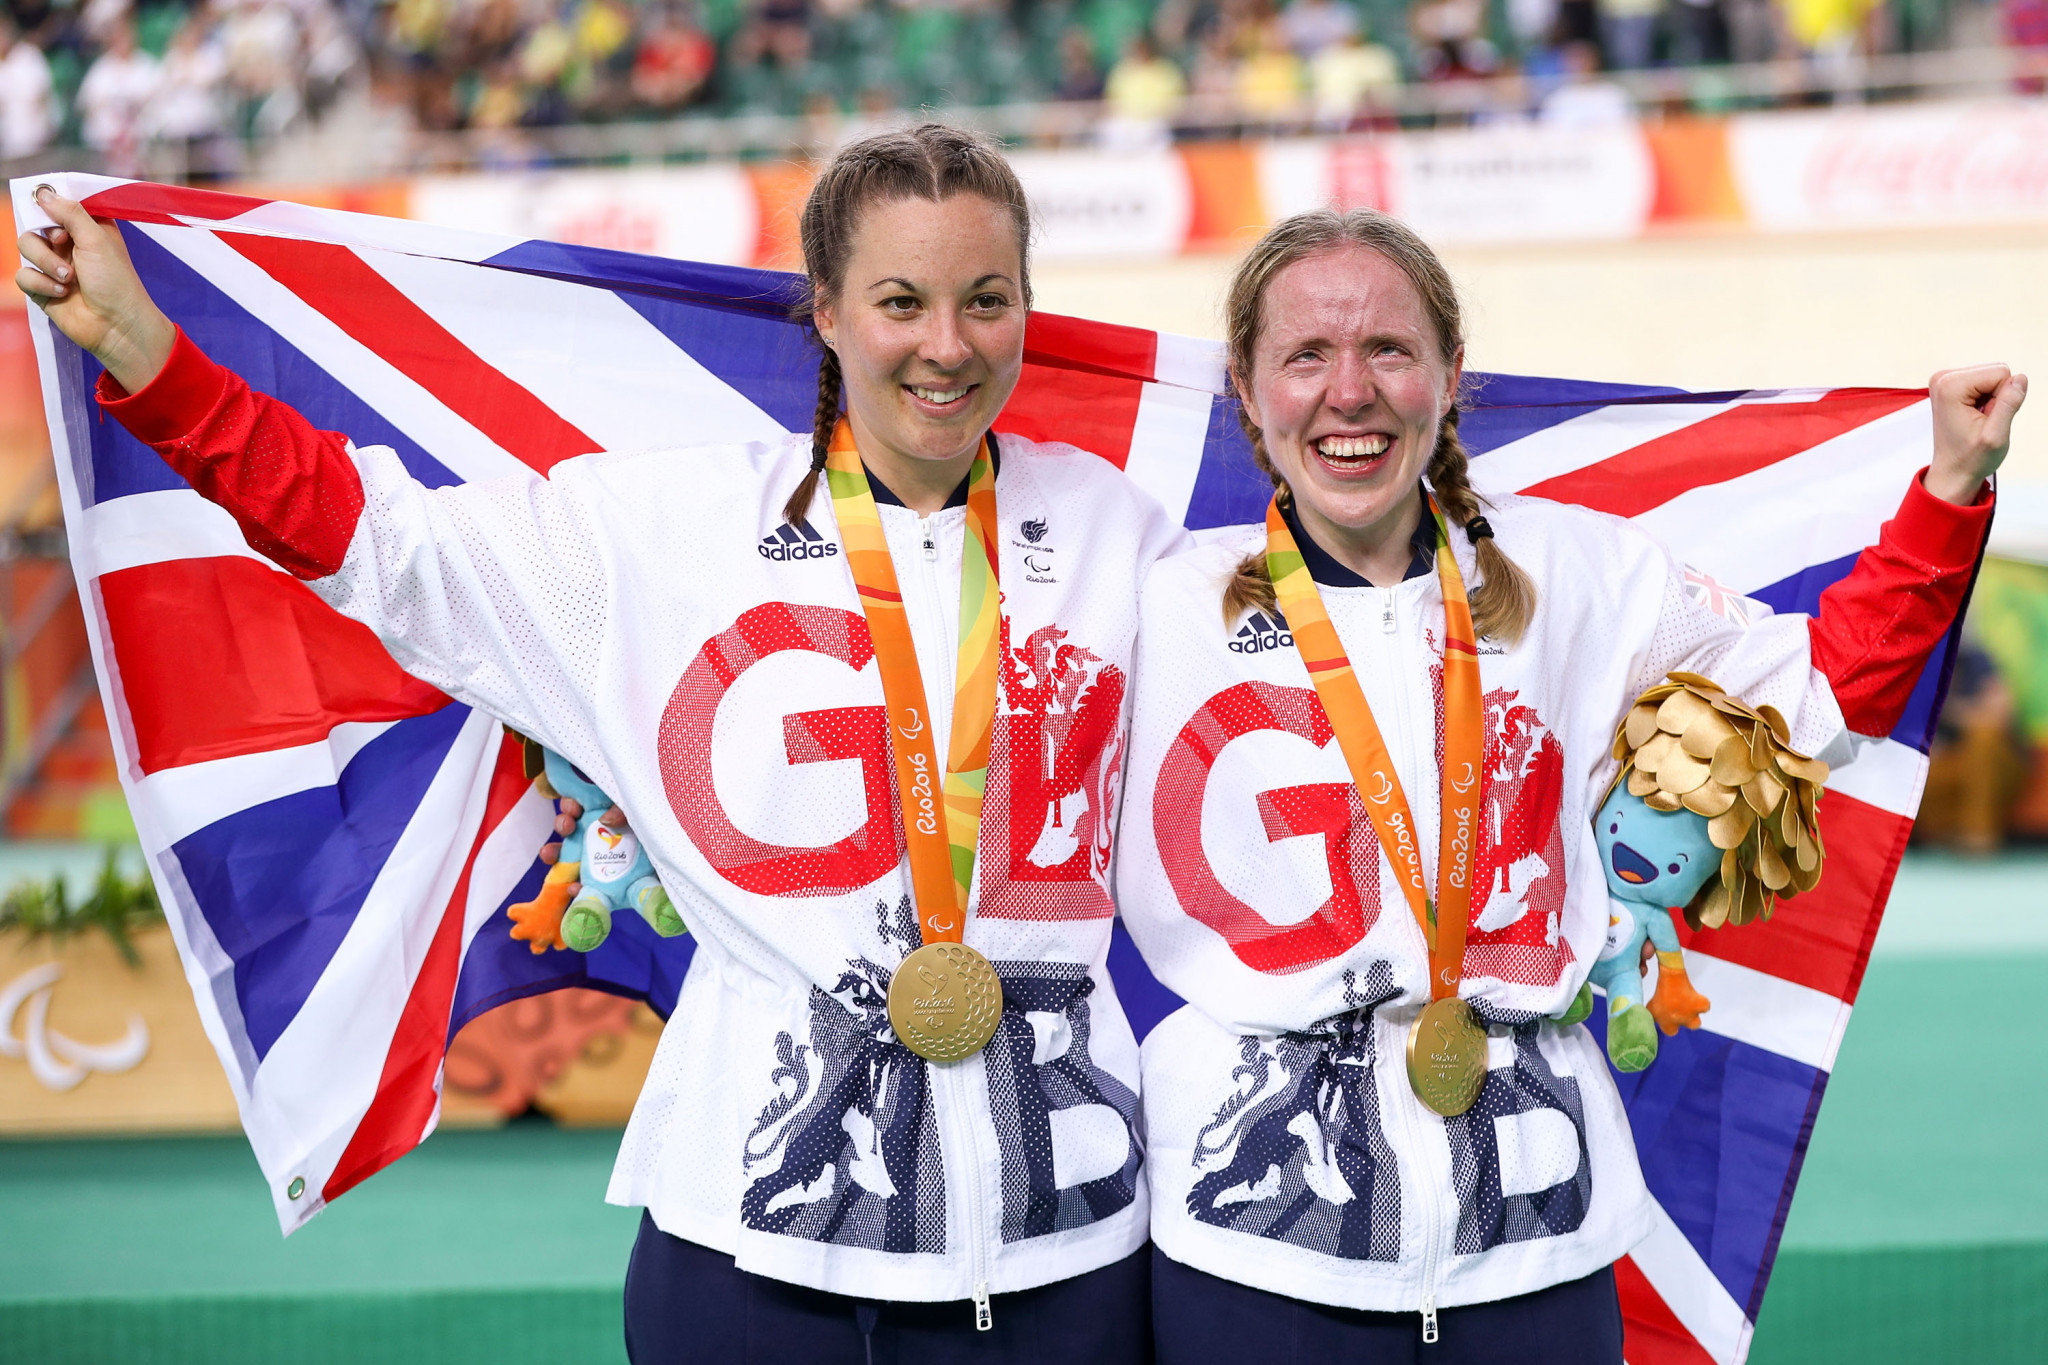 ParalympicsGB won a 147 medals, including 64 golds, at Rio 2016 to finish second overall ©Getty Images